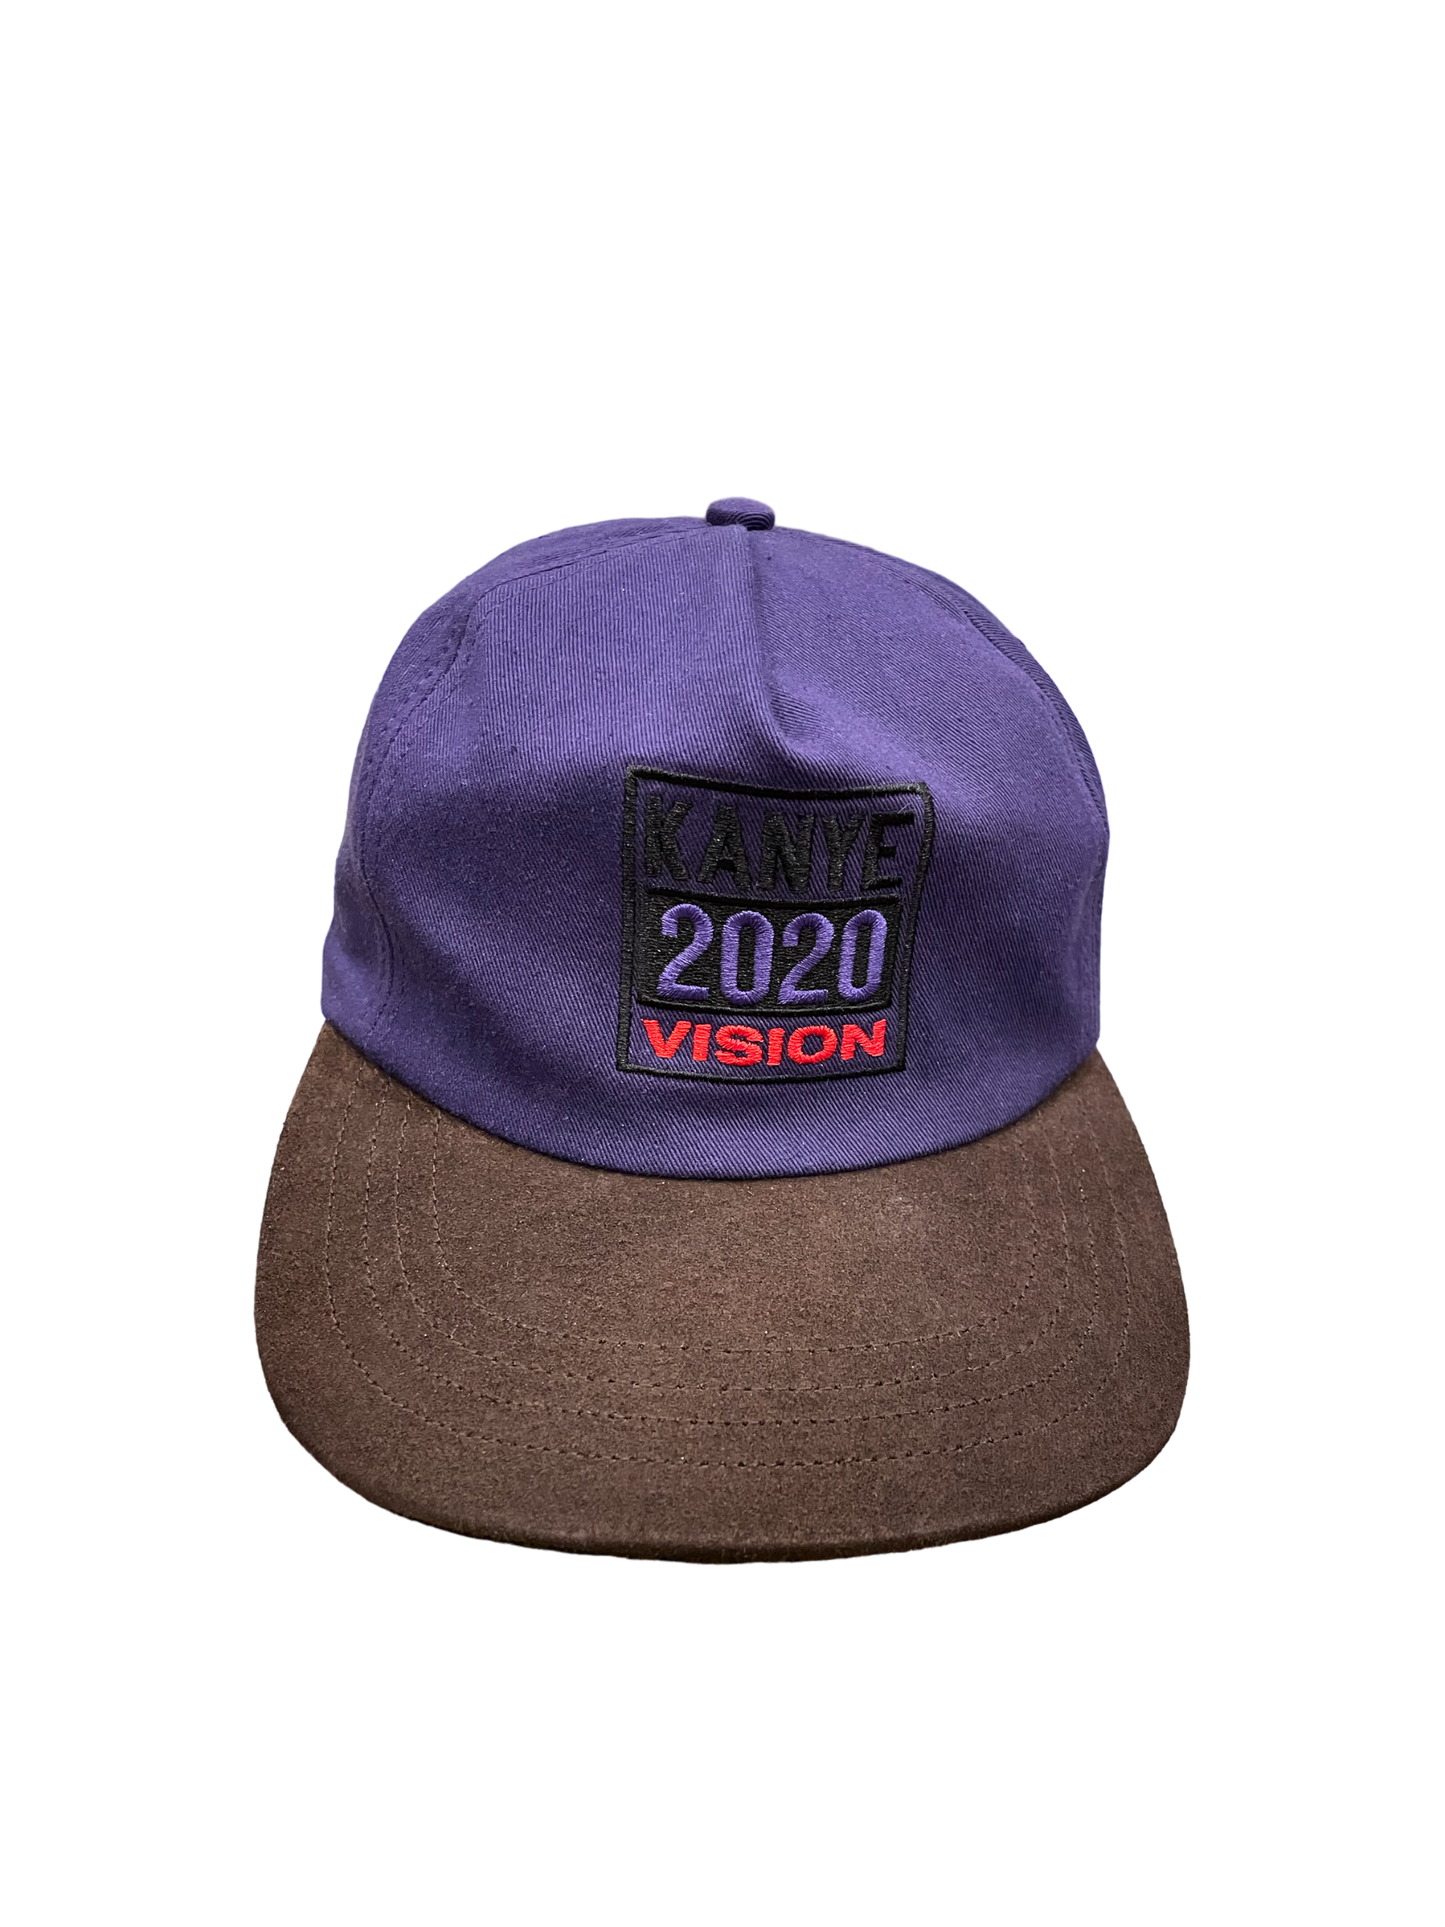 YZY KW 2020 Vision Hat